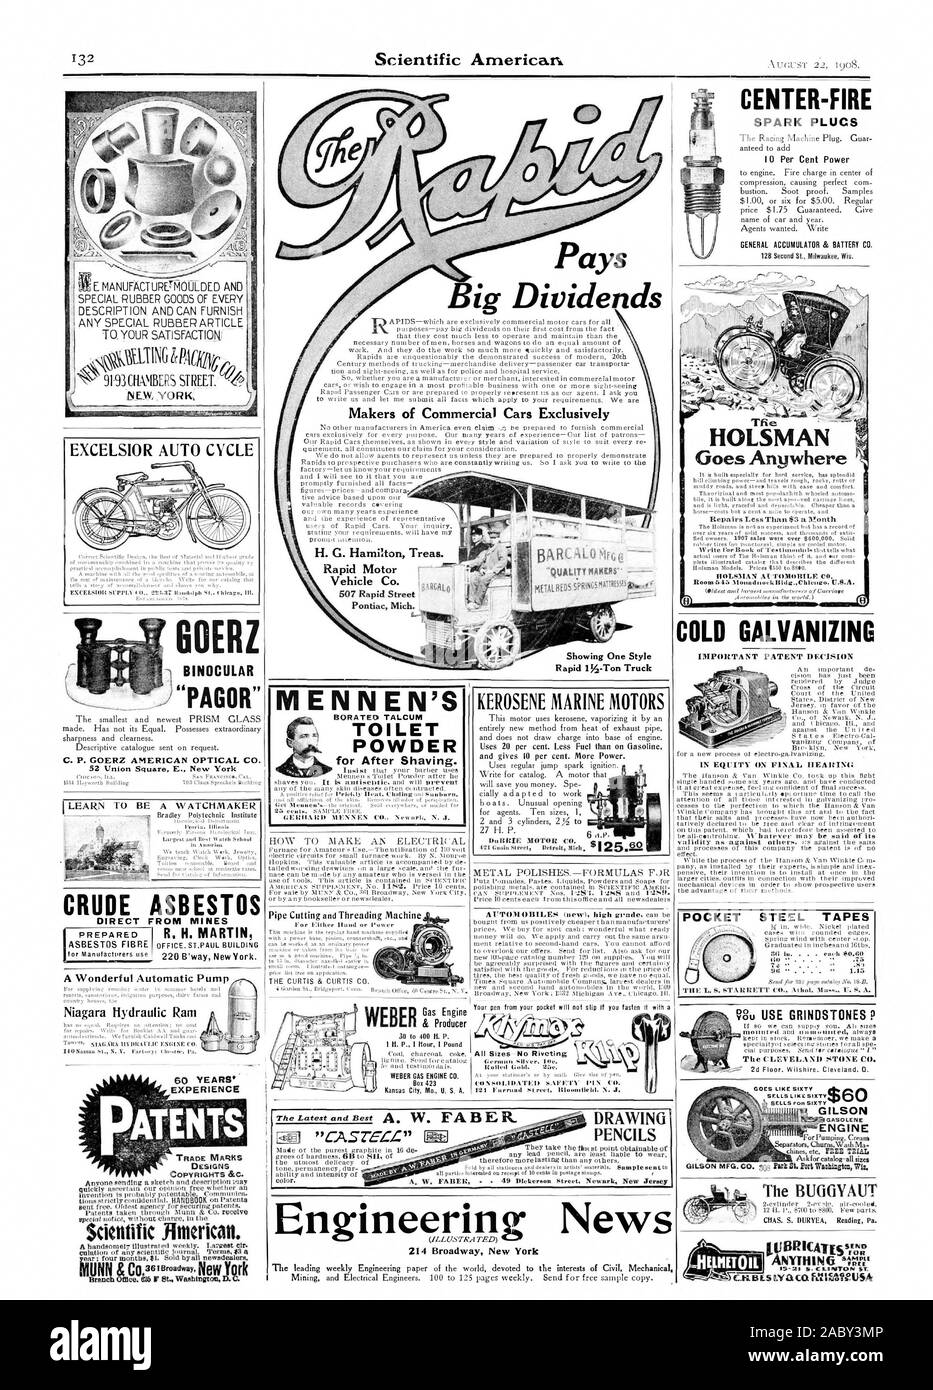 Pays Big Divide ds CENTER-FIRE SPARK PLUCS H. G. Hamilton Treas. Makers of Commercial Cars Exclusively EXCELSIOR AUTO CYCLE  C. P. GOERZ AMERICAN OPTICAL CO. CRUDE ASBESTOS DIRECT FROM MINES A Wonderful Automatic Pump Niagara Hydraulic Ram EXPERIENCE PATENTS DESIGNS COPYRIGHTS &C. Scitatific American. Gas Engine & Producer Tfie HOLSMAN Goes Anywhere YOU The C:LEVELANII STONE CO. GOES LIKE SIXTY GILSON GASOLENE ENGINE Separators ChurnsWash M. The BUGGYAUT lillYTHING 'ME' MENNEN'S BORATE° TALCUM TOILET POWDER for After Shaving. KEROSENE MARINE MOTORS POCKET STEEL TAPES TIIE L. S.' A EIZETT Aihnl Stock Photo